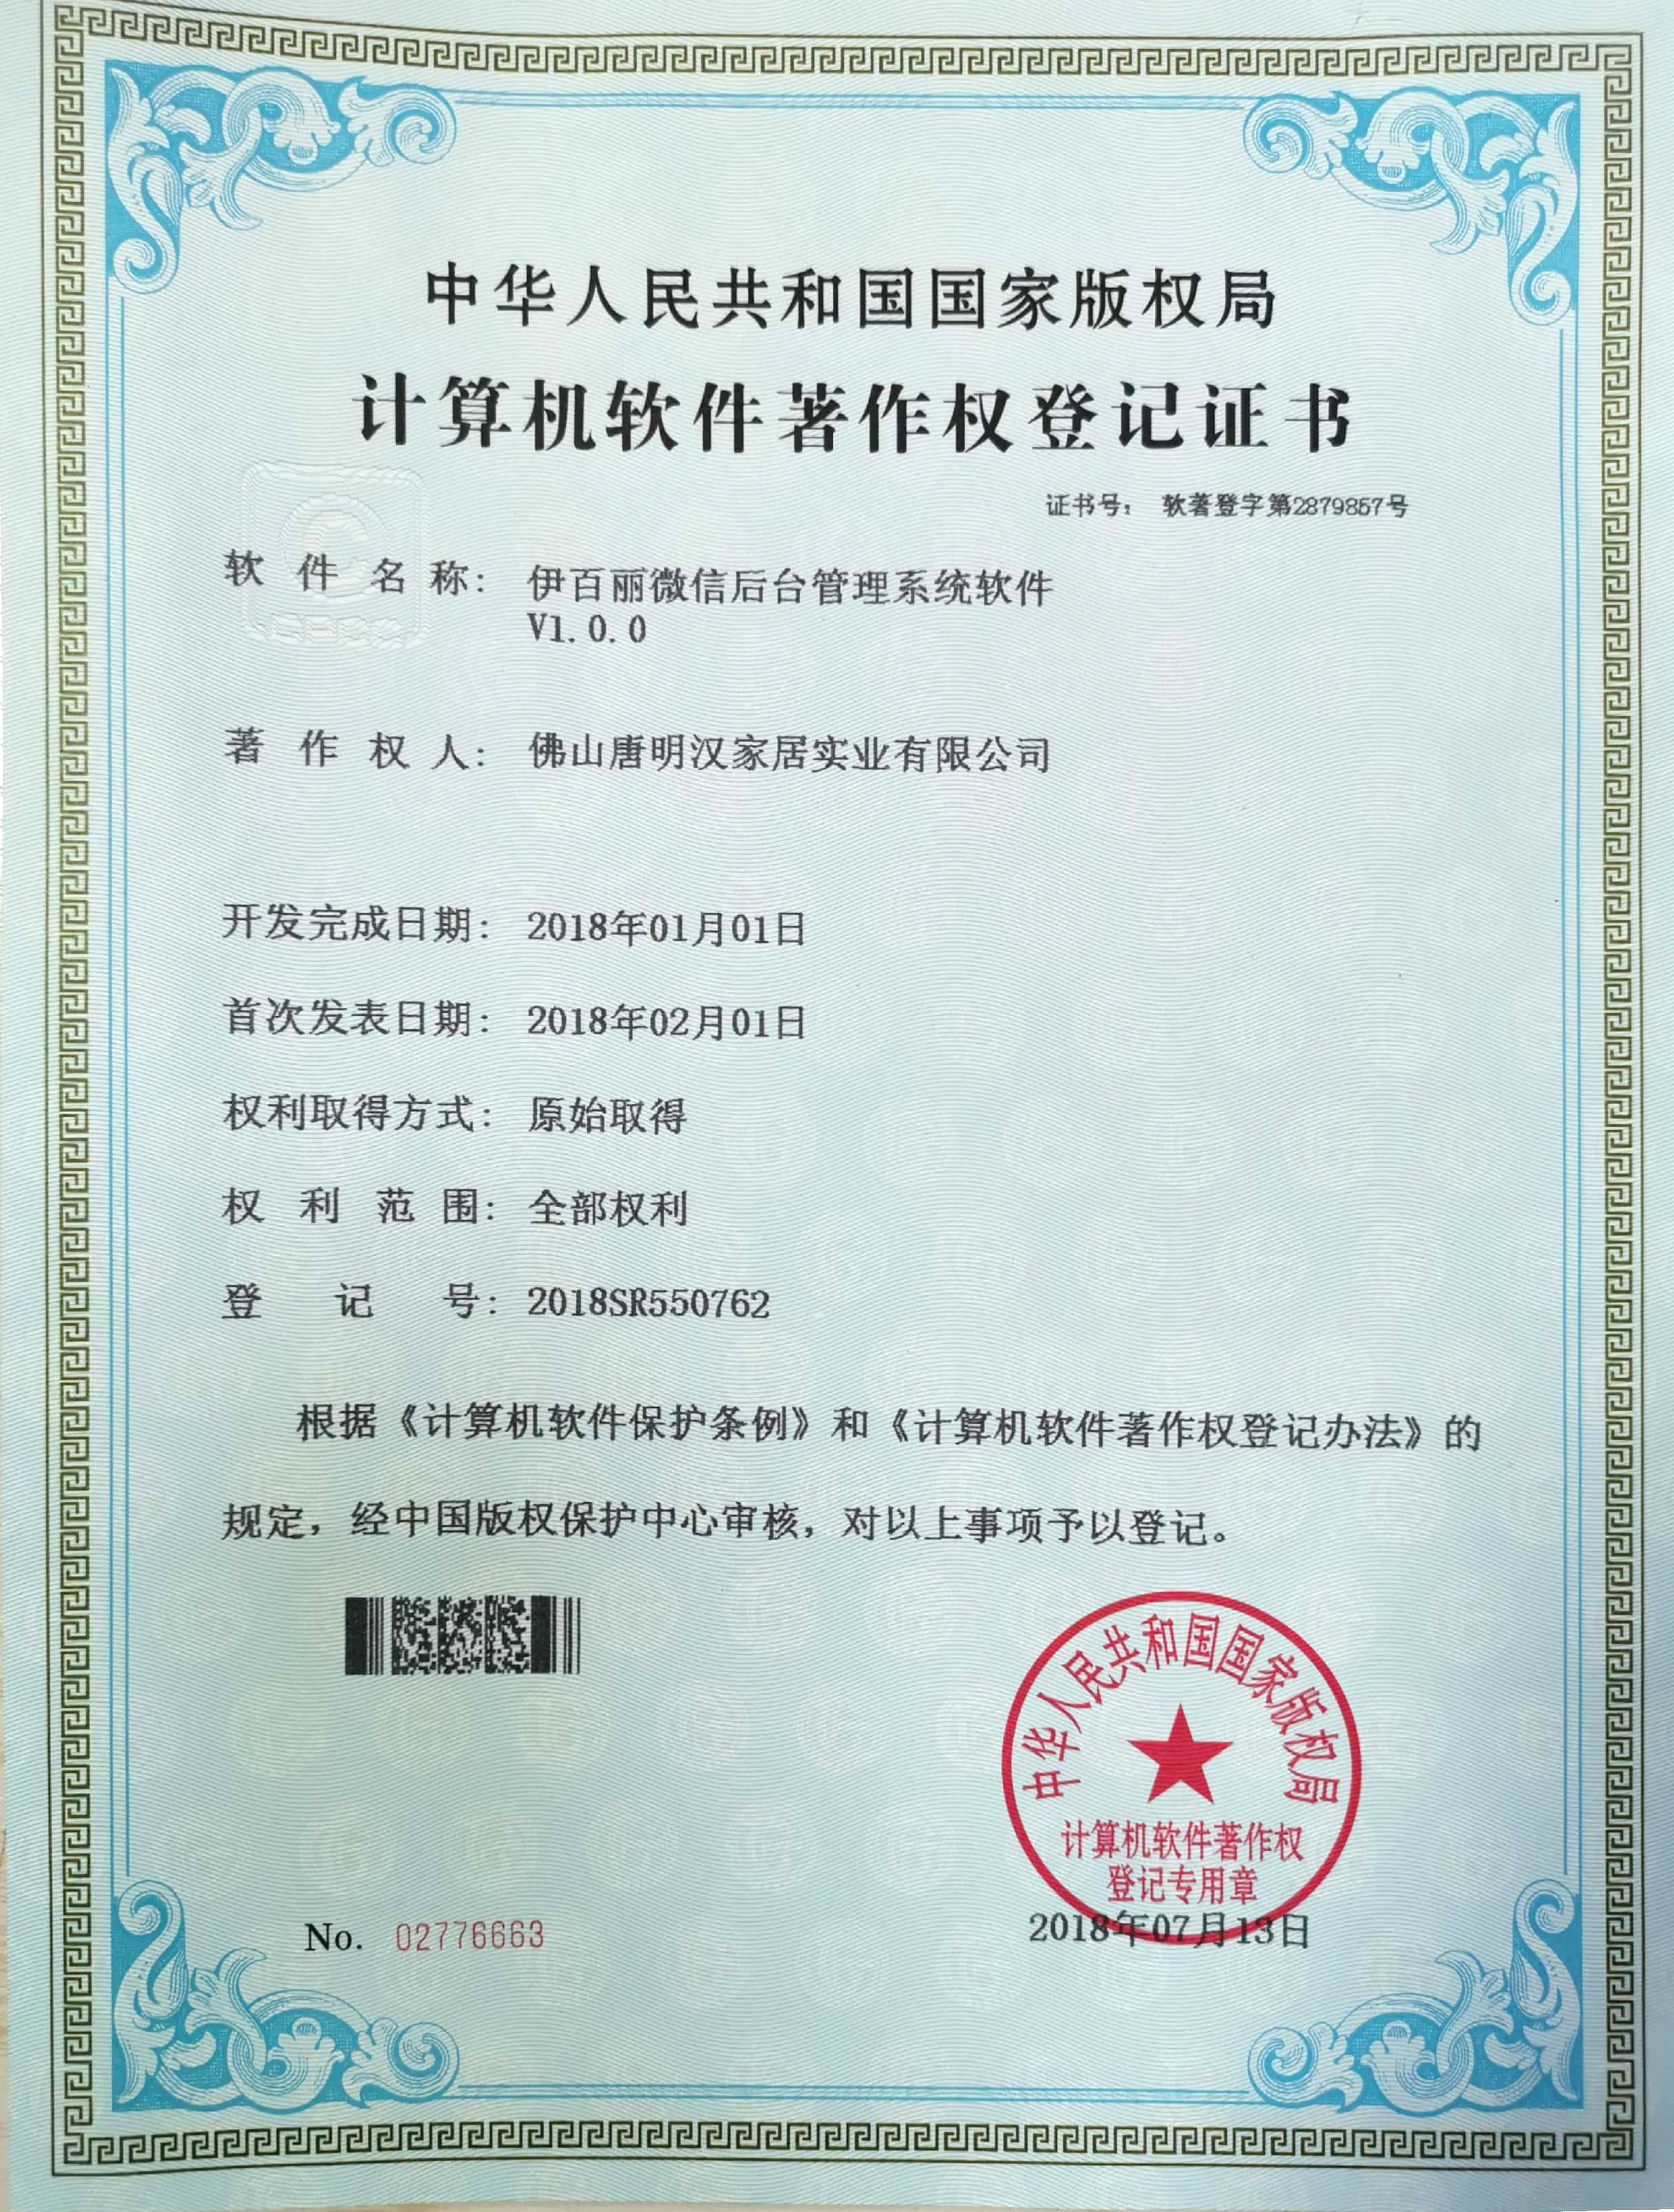 The patent certificate of EBERY WeChat backstage management system